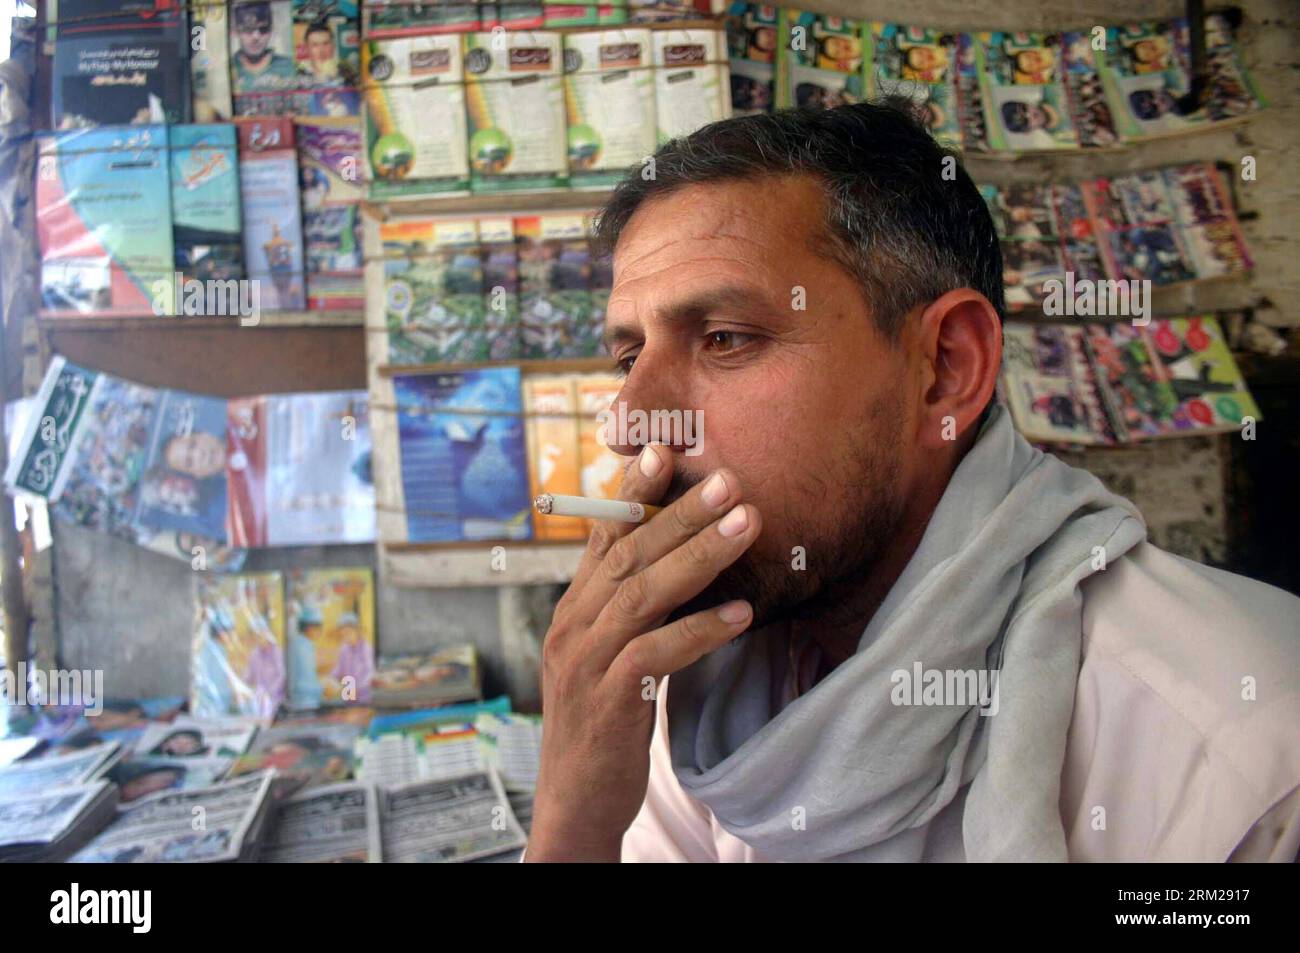 Bildnummer: 59743781  Datum: 31.05.2013  Copyright: imago/Xinhua (130531) -- PESHAWAR, May 31, 2013 (Xinhua) -- A Pakistani man smokes on World No Tobacco Day in northwest Pakistan s Peshawar on May 31, 2013. The World Health Organization (WHO) has called for a comprehensive ban on all tobacco advertising, promotion and sponsorship, saying that the tobacco companies aggressive marketing has led to addiction killing at least six million worldwide each year. (Xinhua Photo/Ahmad Sidique) PAKISTAN-PESHAWAR-WORLD NO TOBACCO DAY PUBLICATIONxNOTxINxCHN xas x0x 2013 quer      59743781 Date 31 05 2013 Stock Photo